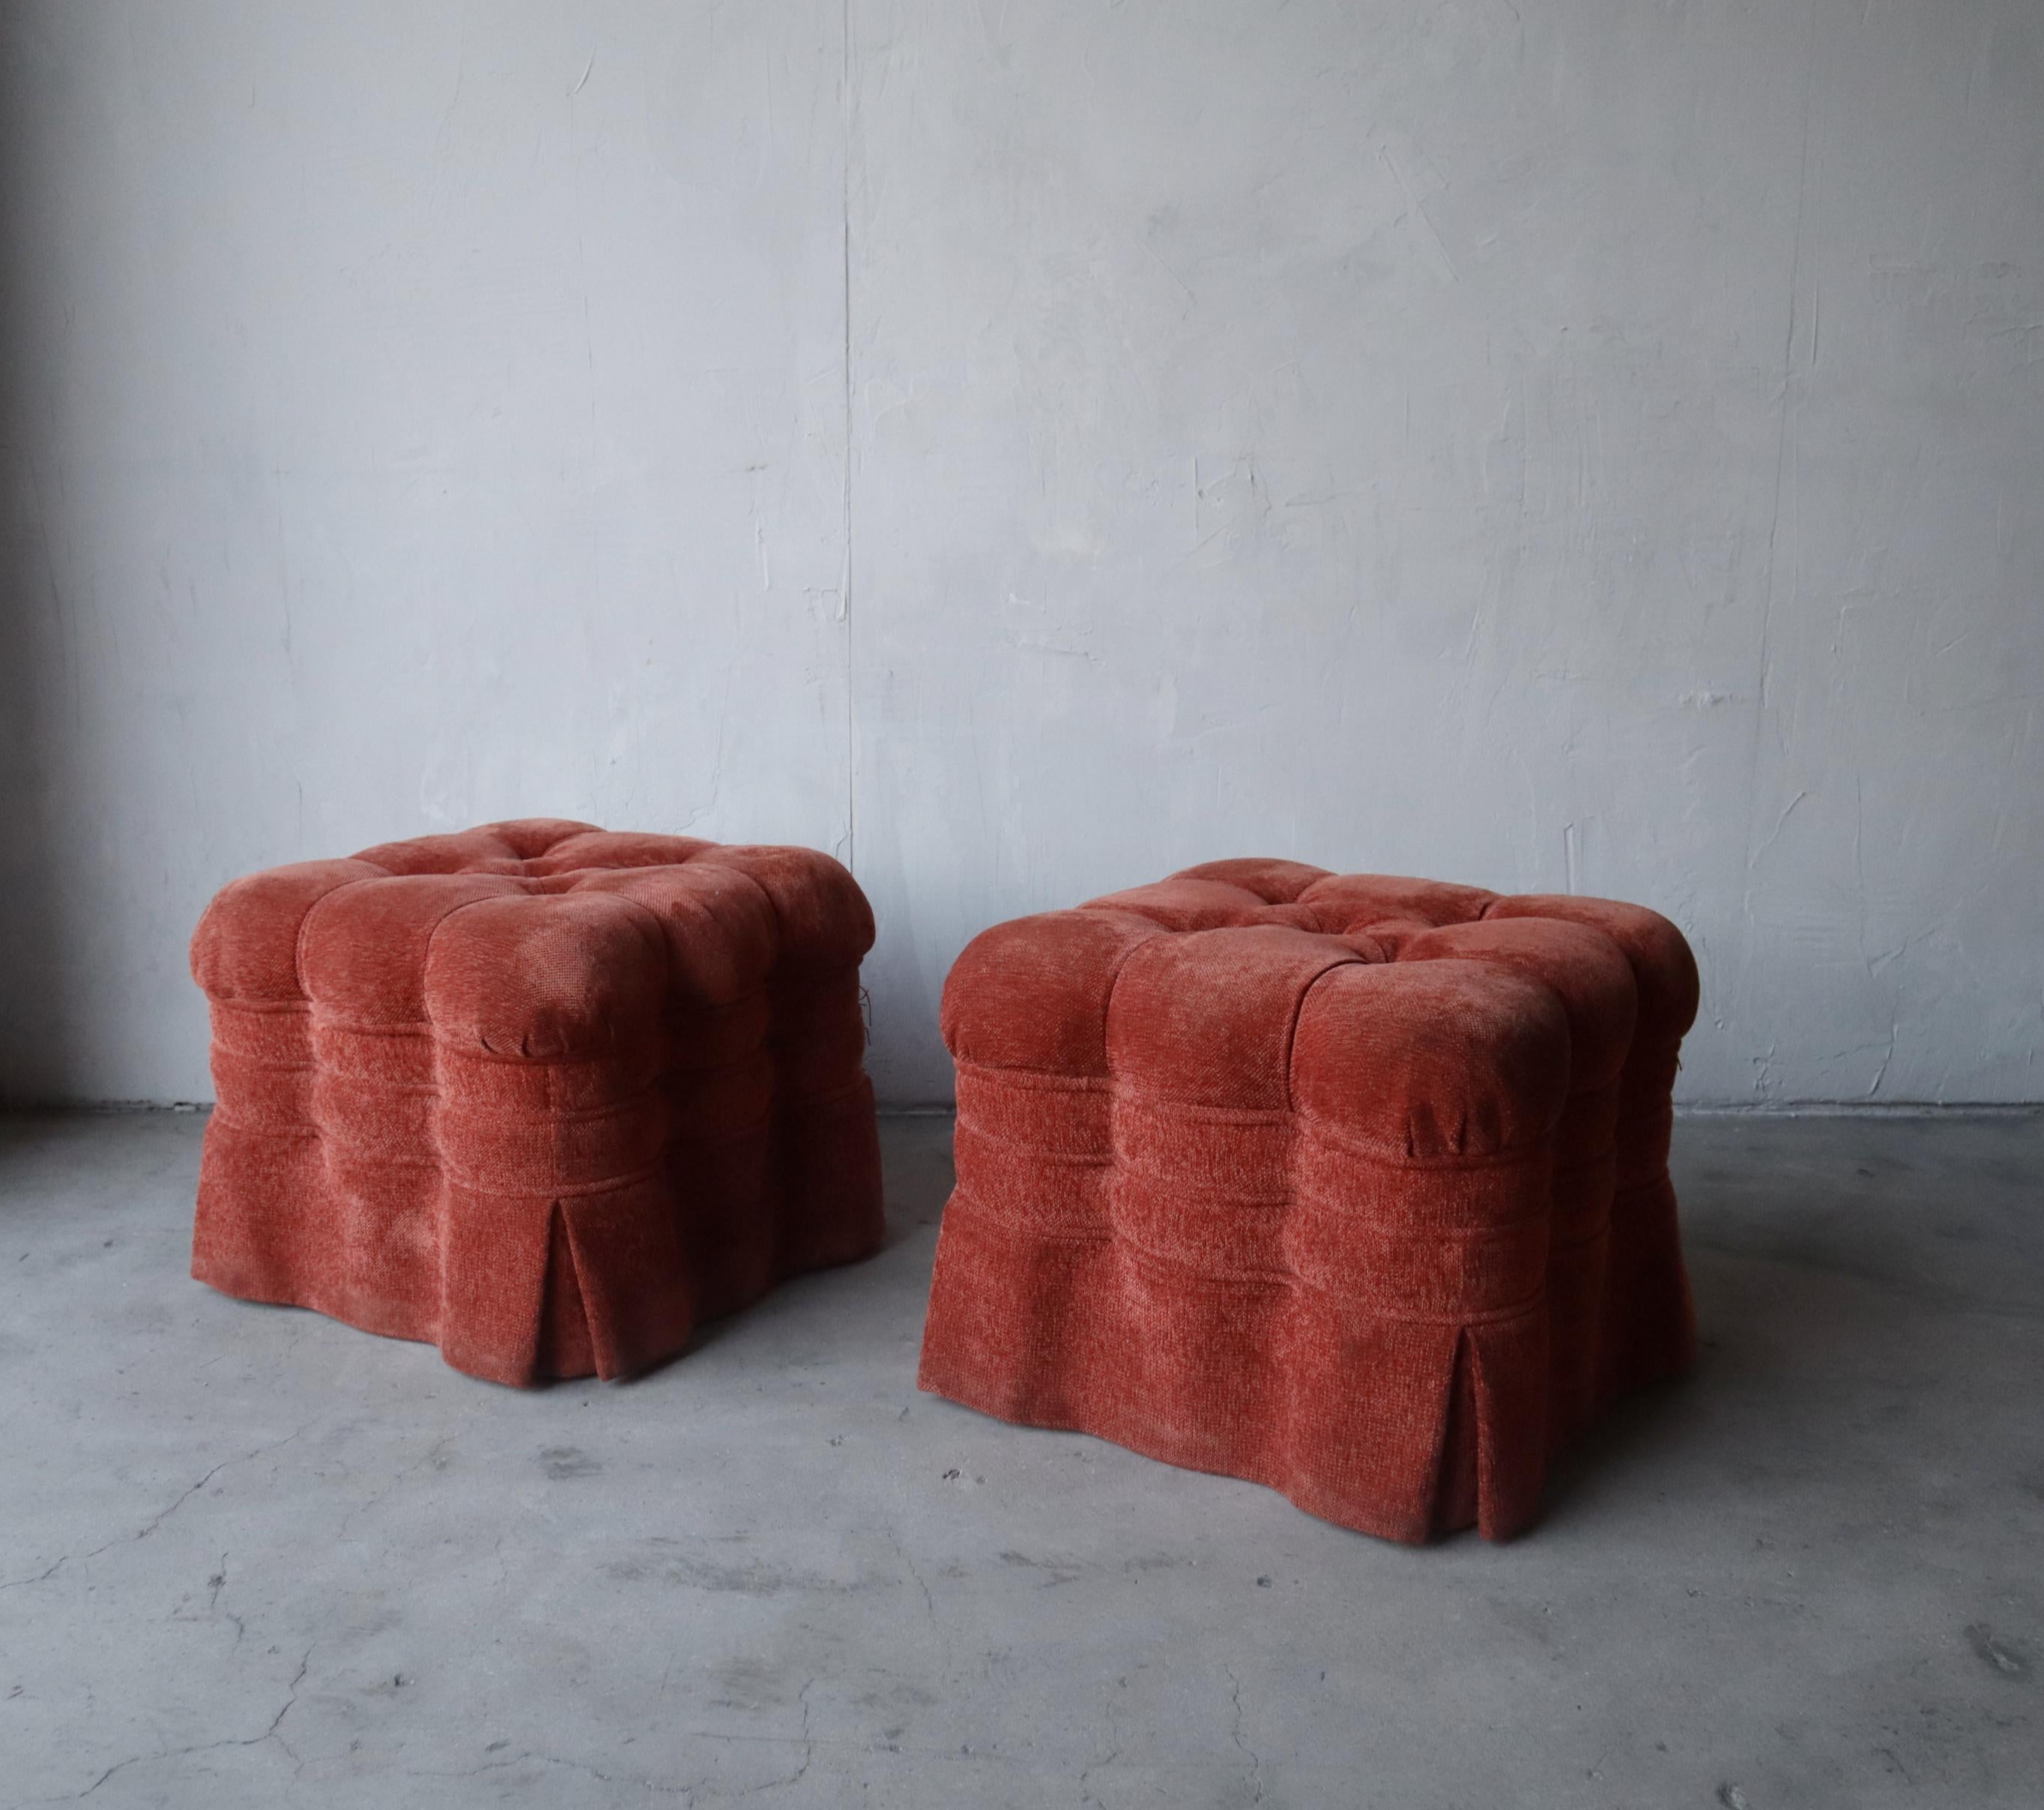 Paprika perfection. This fun pair of skirted ottomans are big in size (2ft x 2ft) and style. The deep biscuit tufting, scallop edges and skirting really sets these beauties off. Use as mere decor or comfy extra seating. 

These 2 are heavy, truly